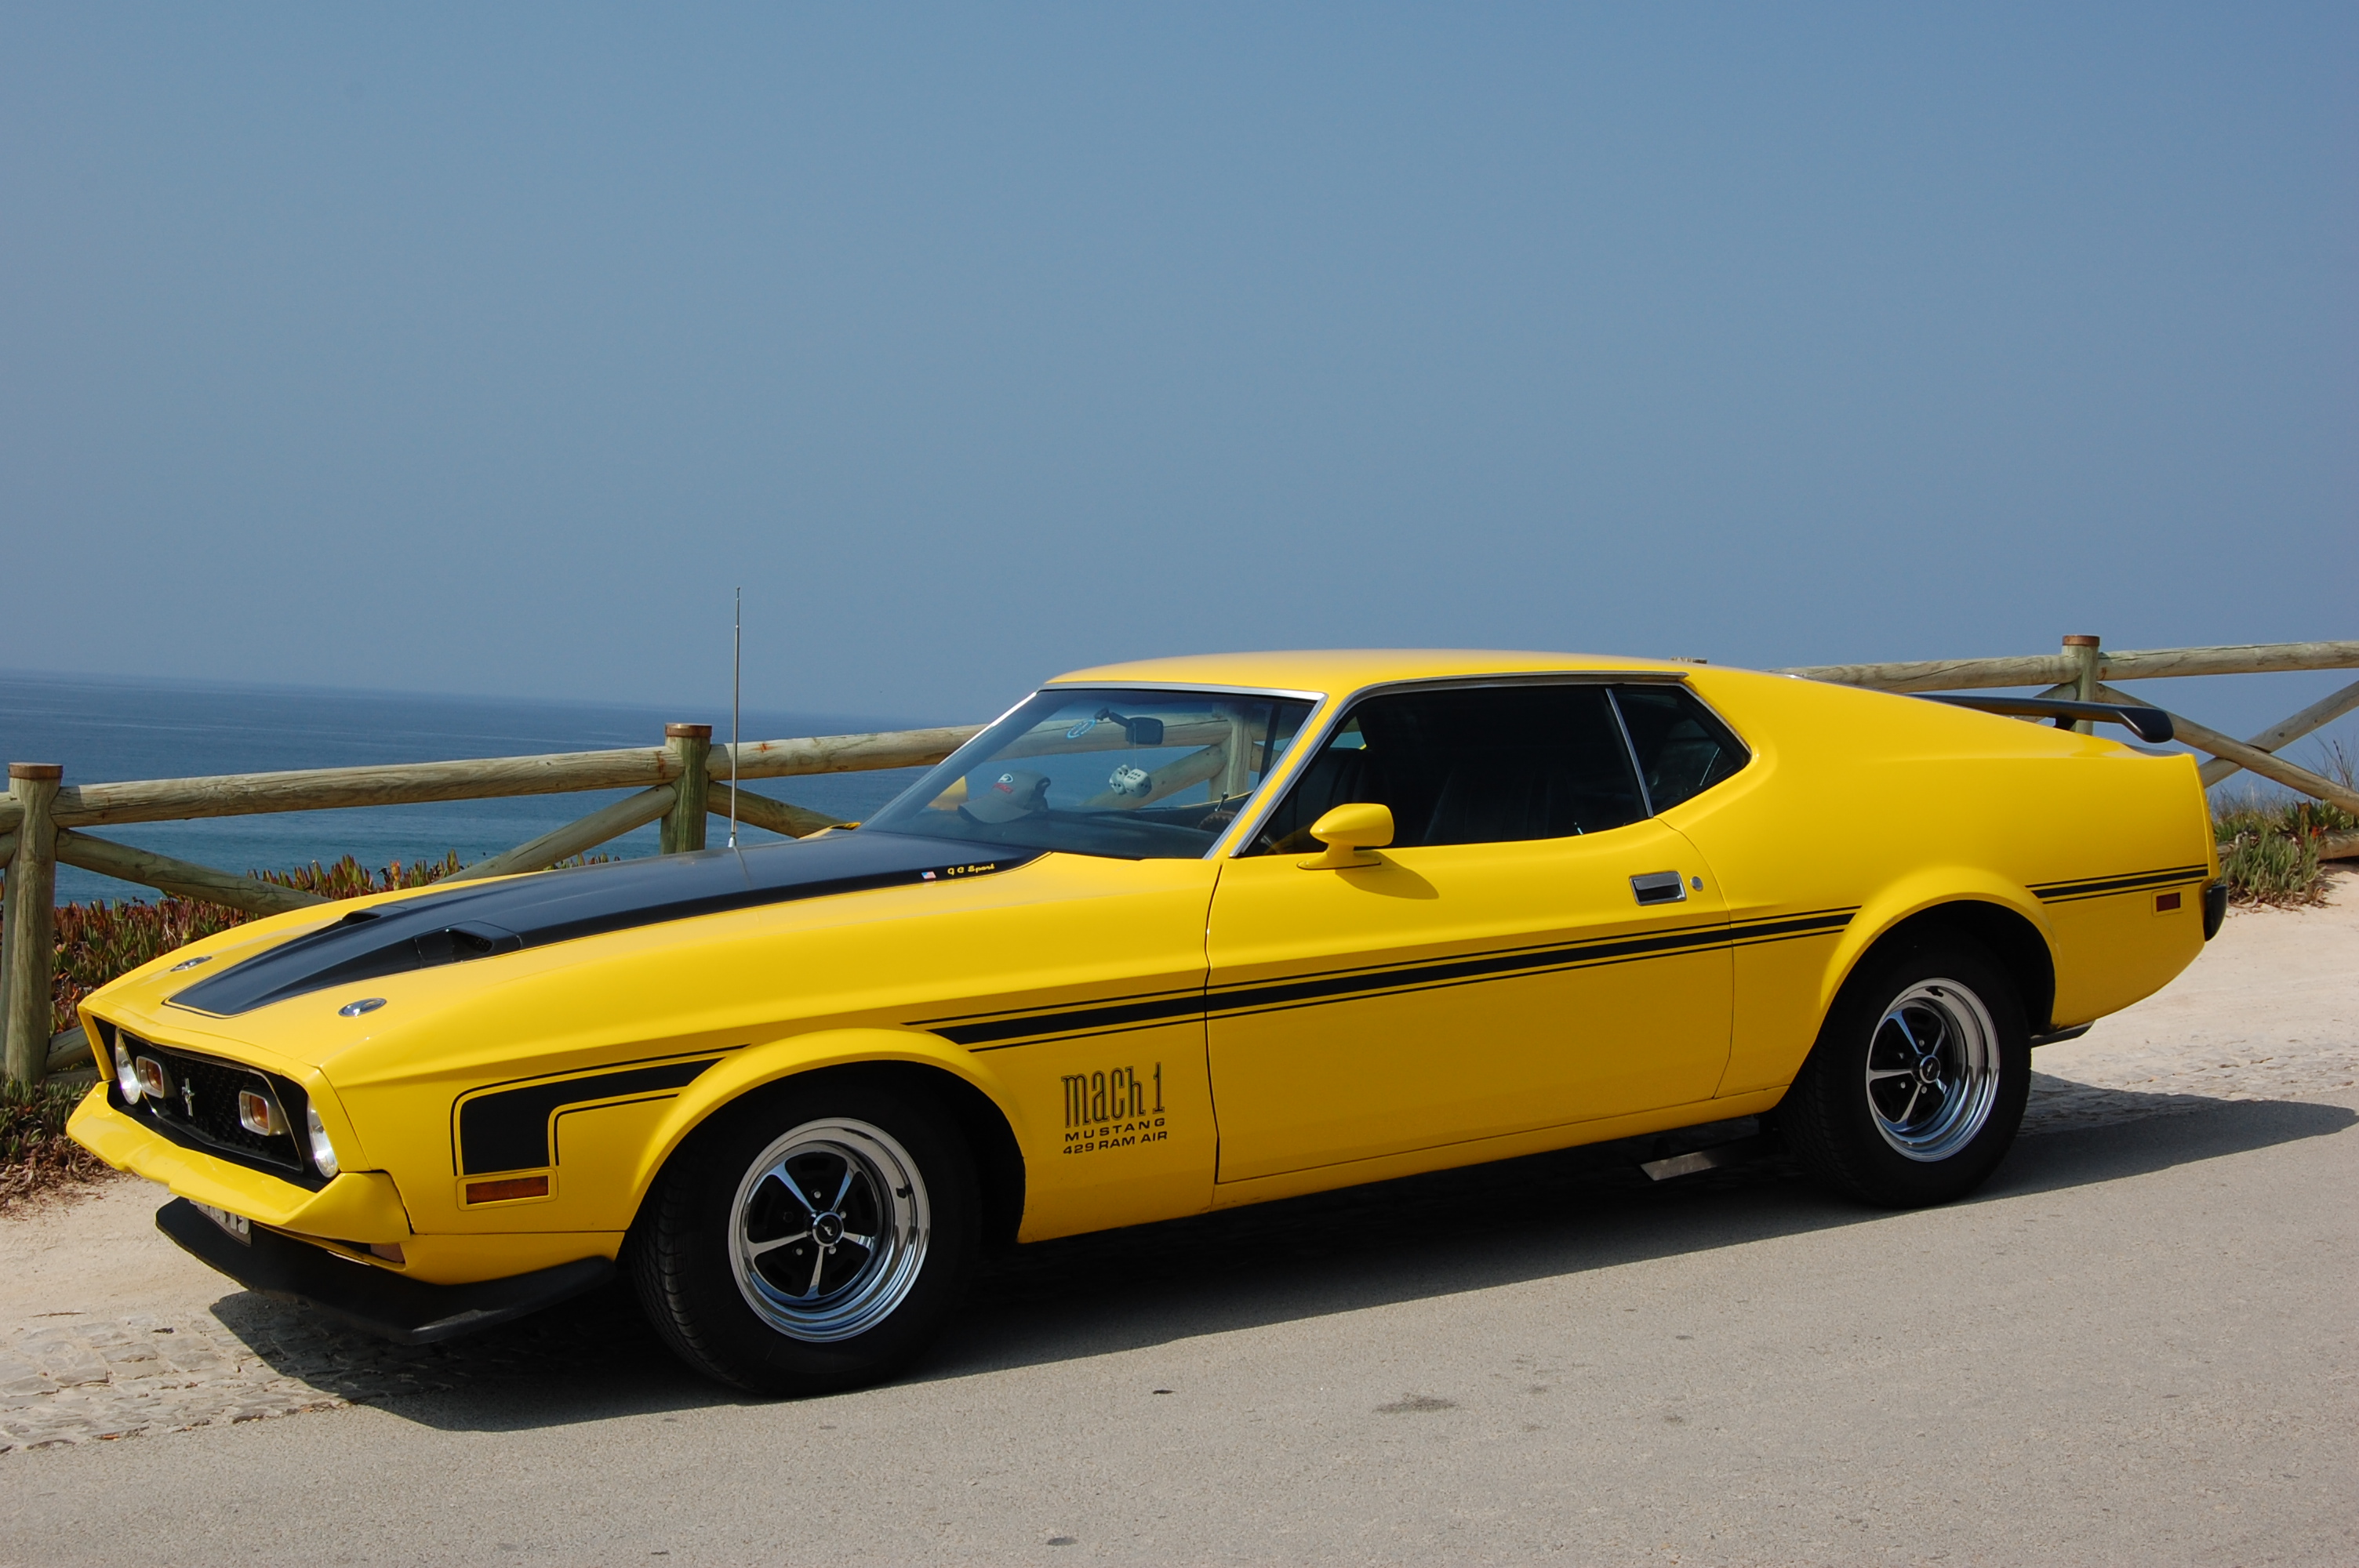 Ford Mustang Mach 1 Backgrounds on Wallpapers Vista